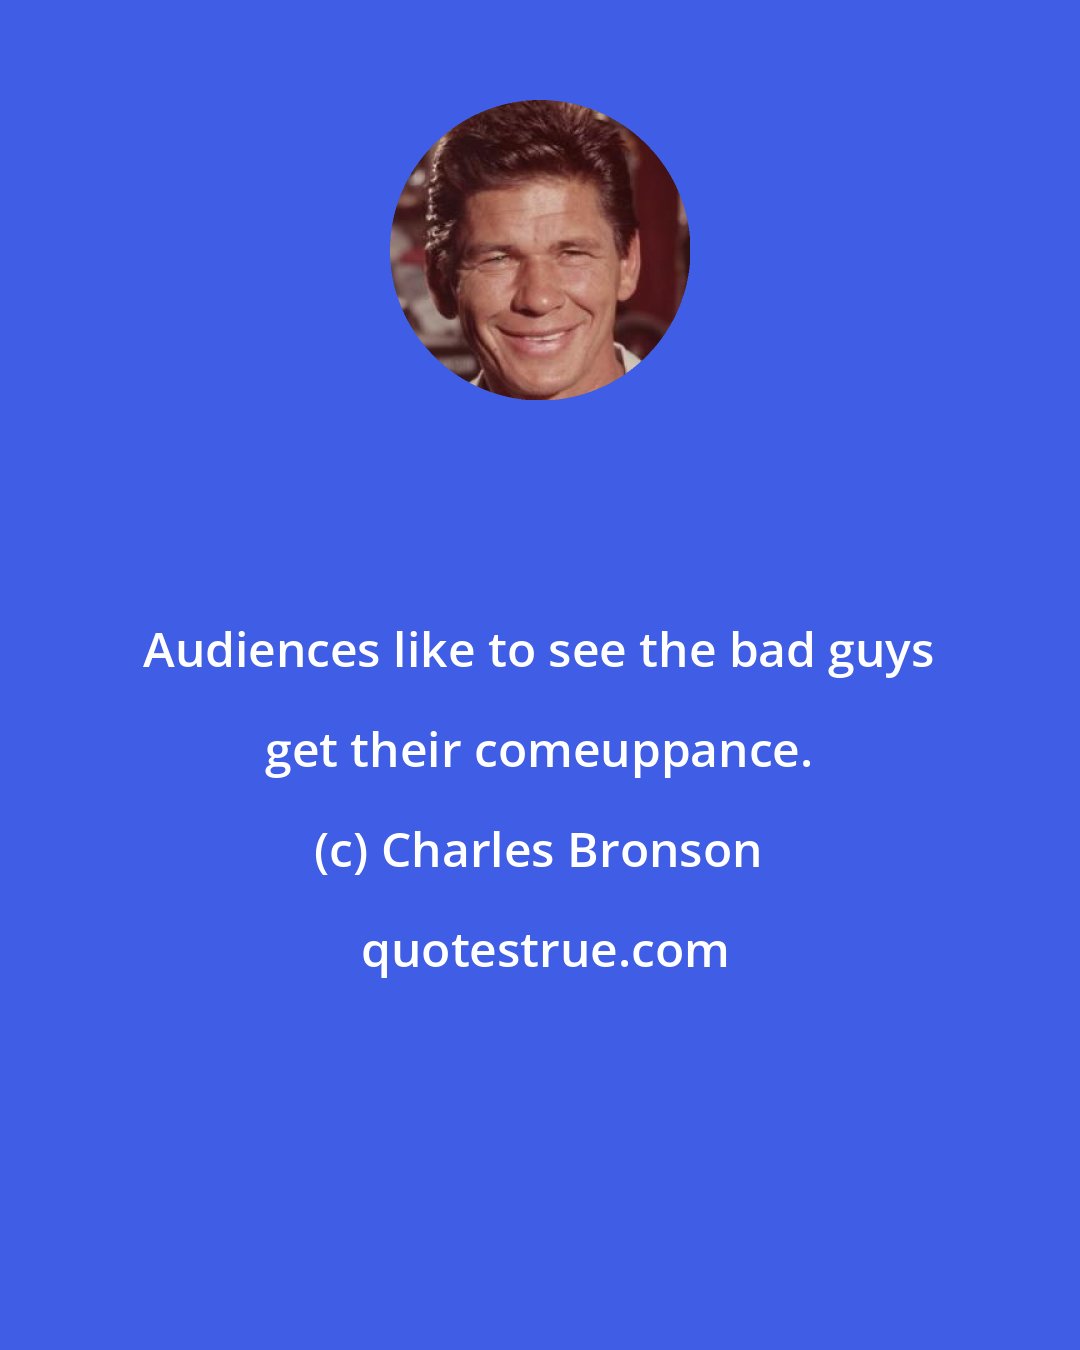 Charles Bronson: Audiences like to see the bad guys get their comeuppance.